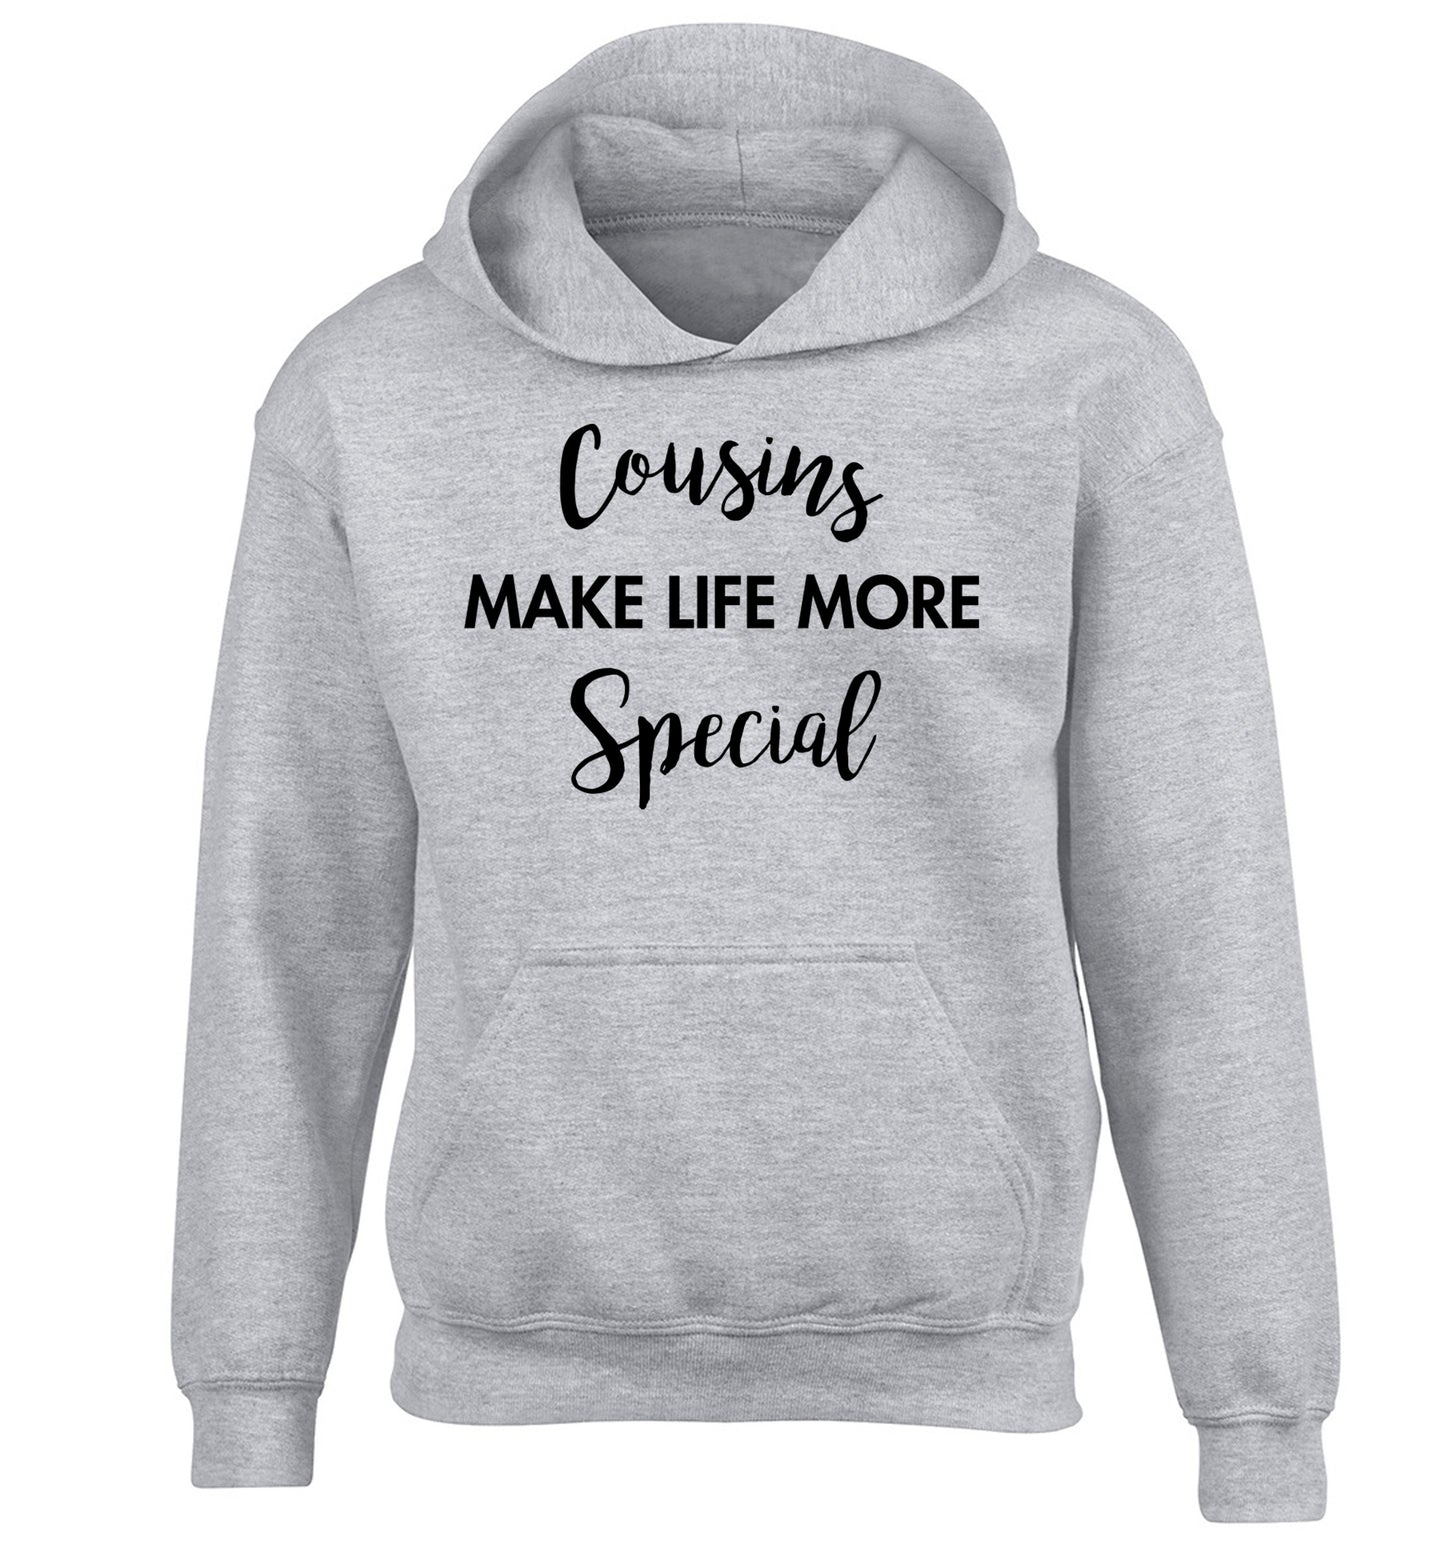 Cousins make life more special children's grey hoodie 12-14 Years